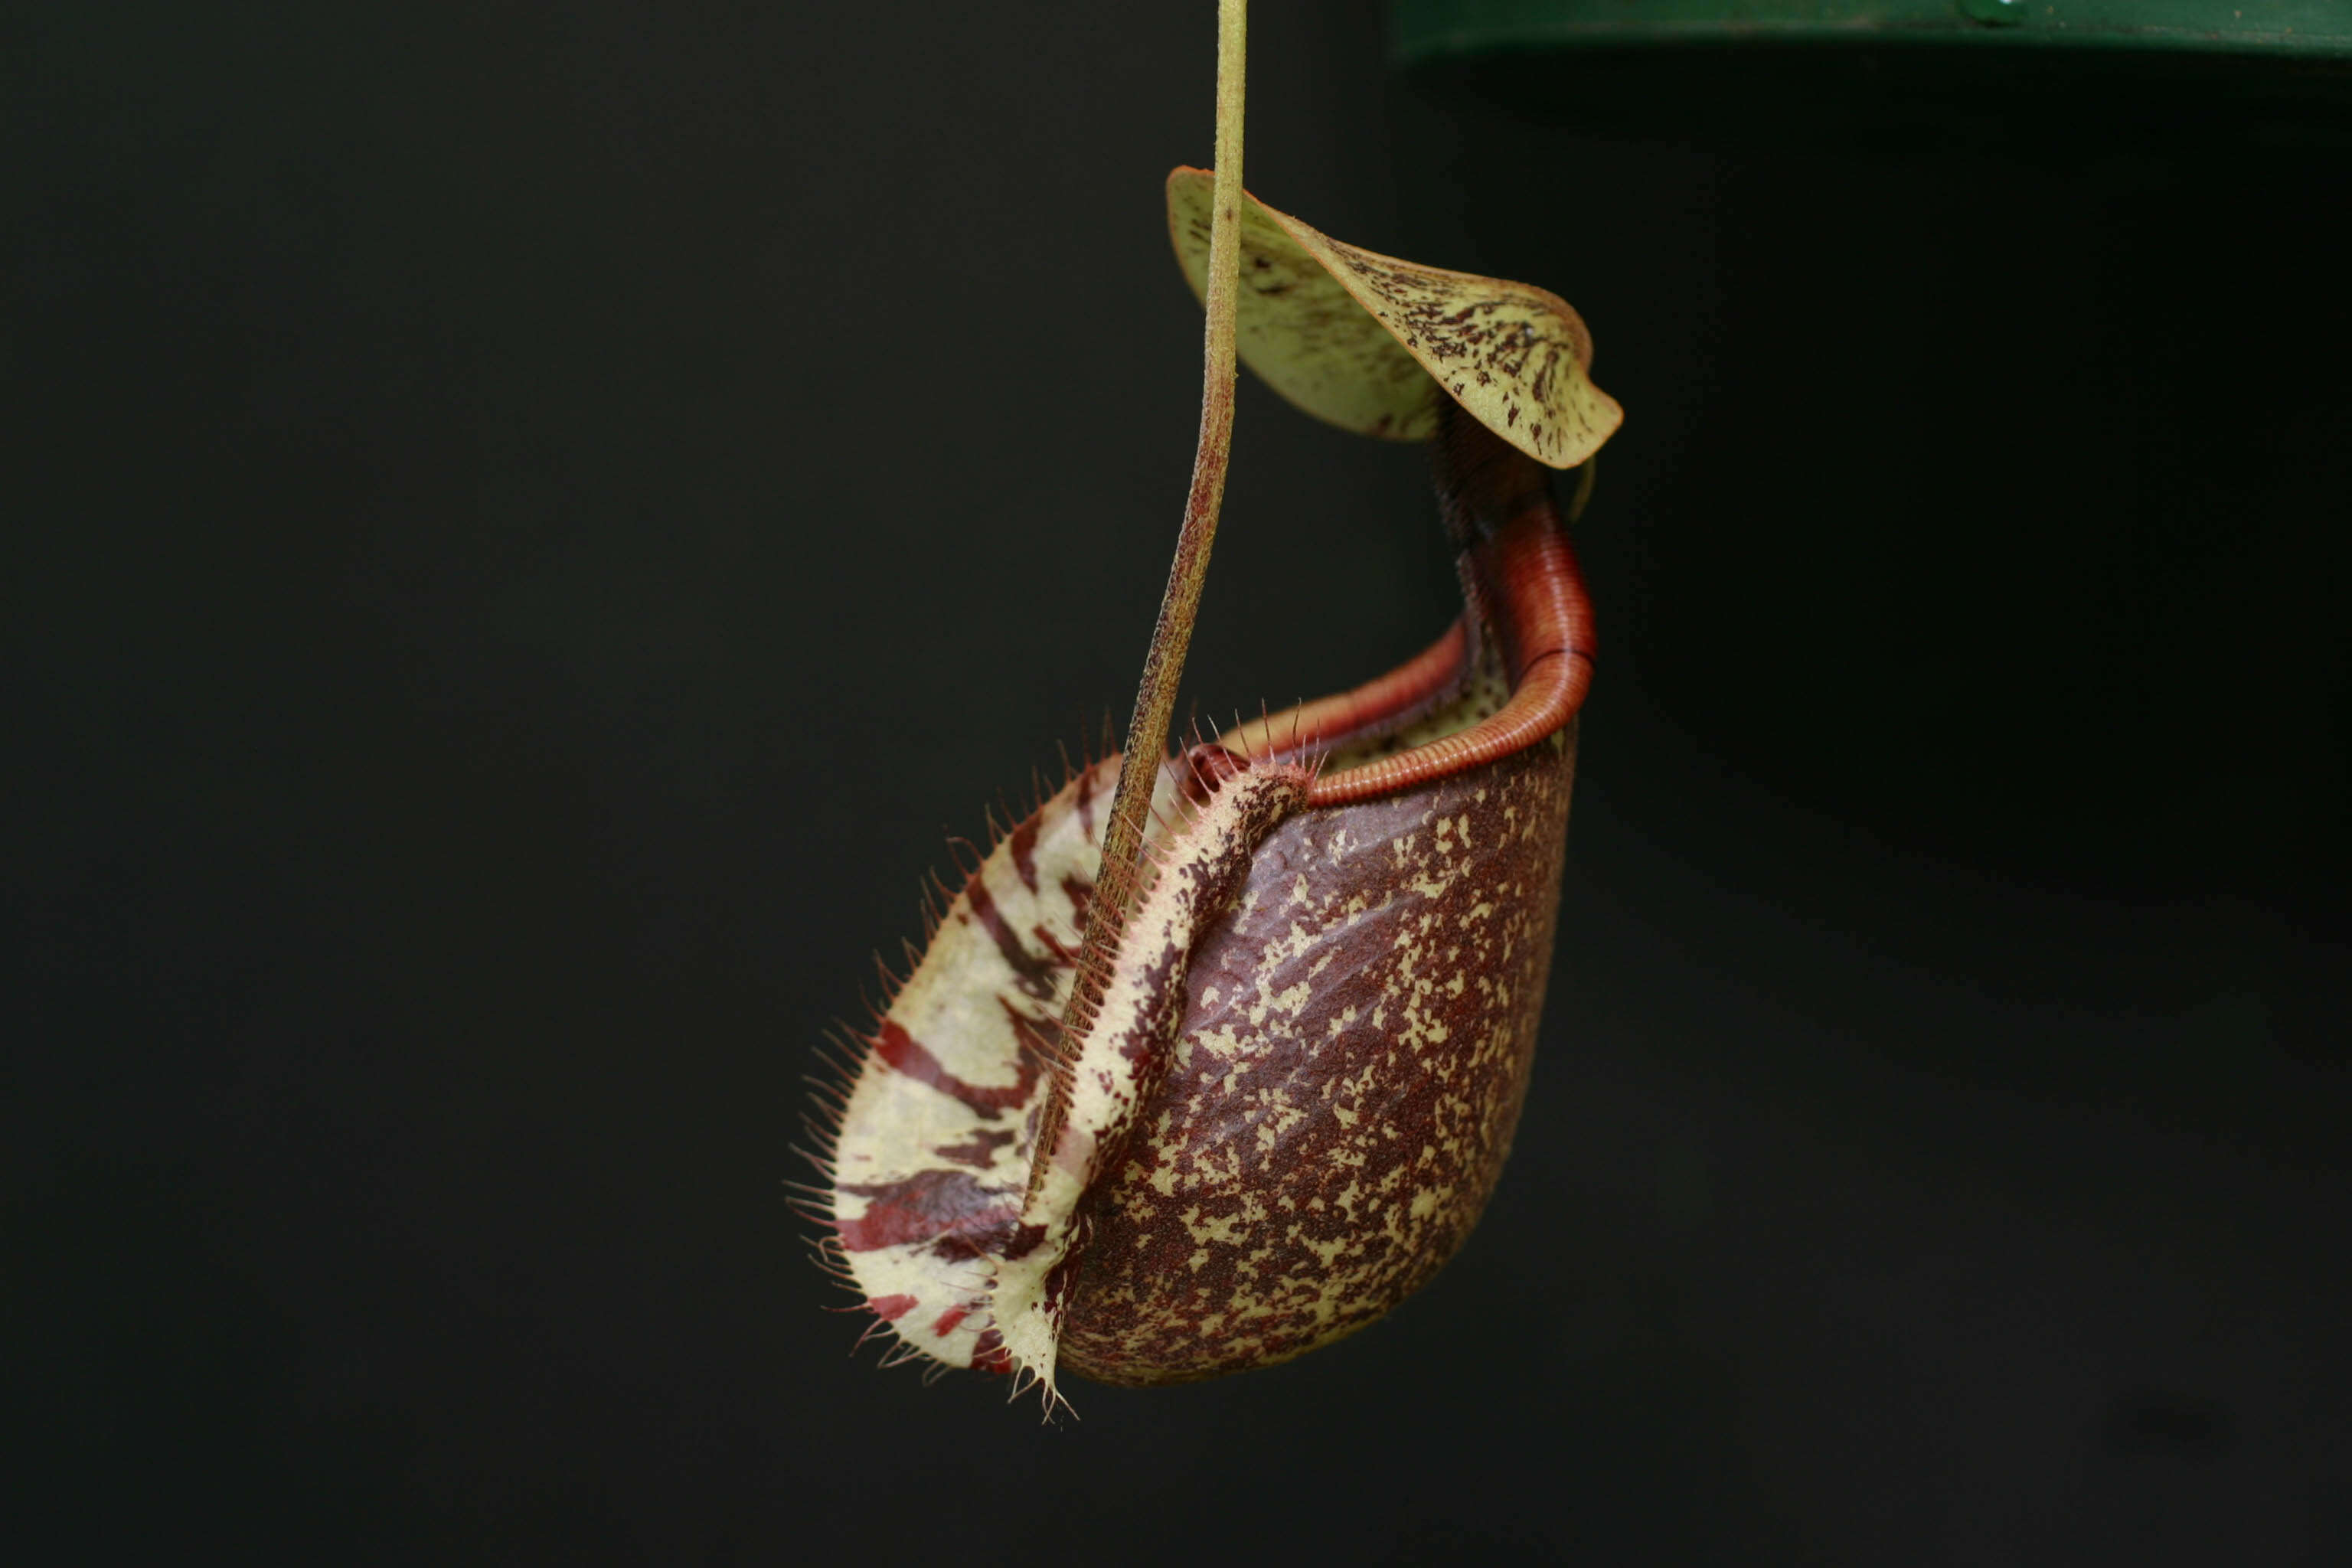 Image of tropical pitcher plants